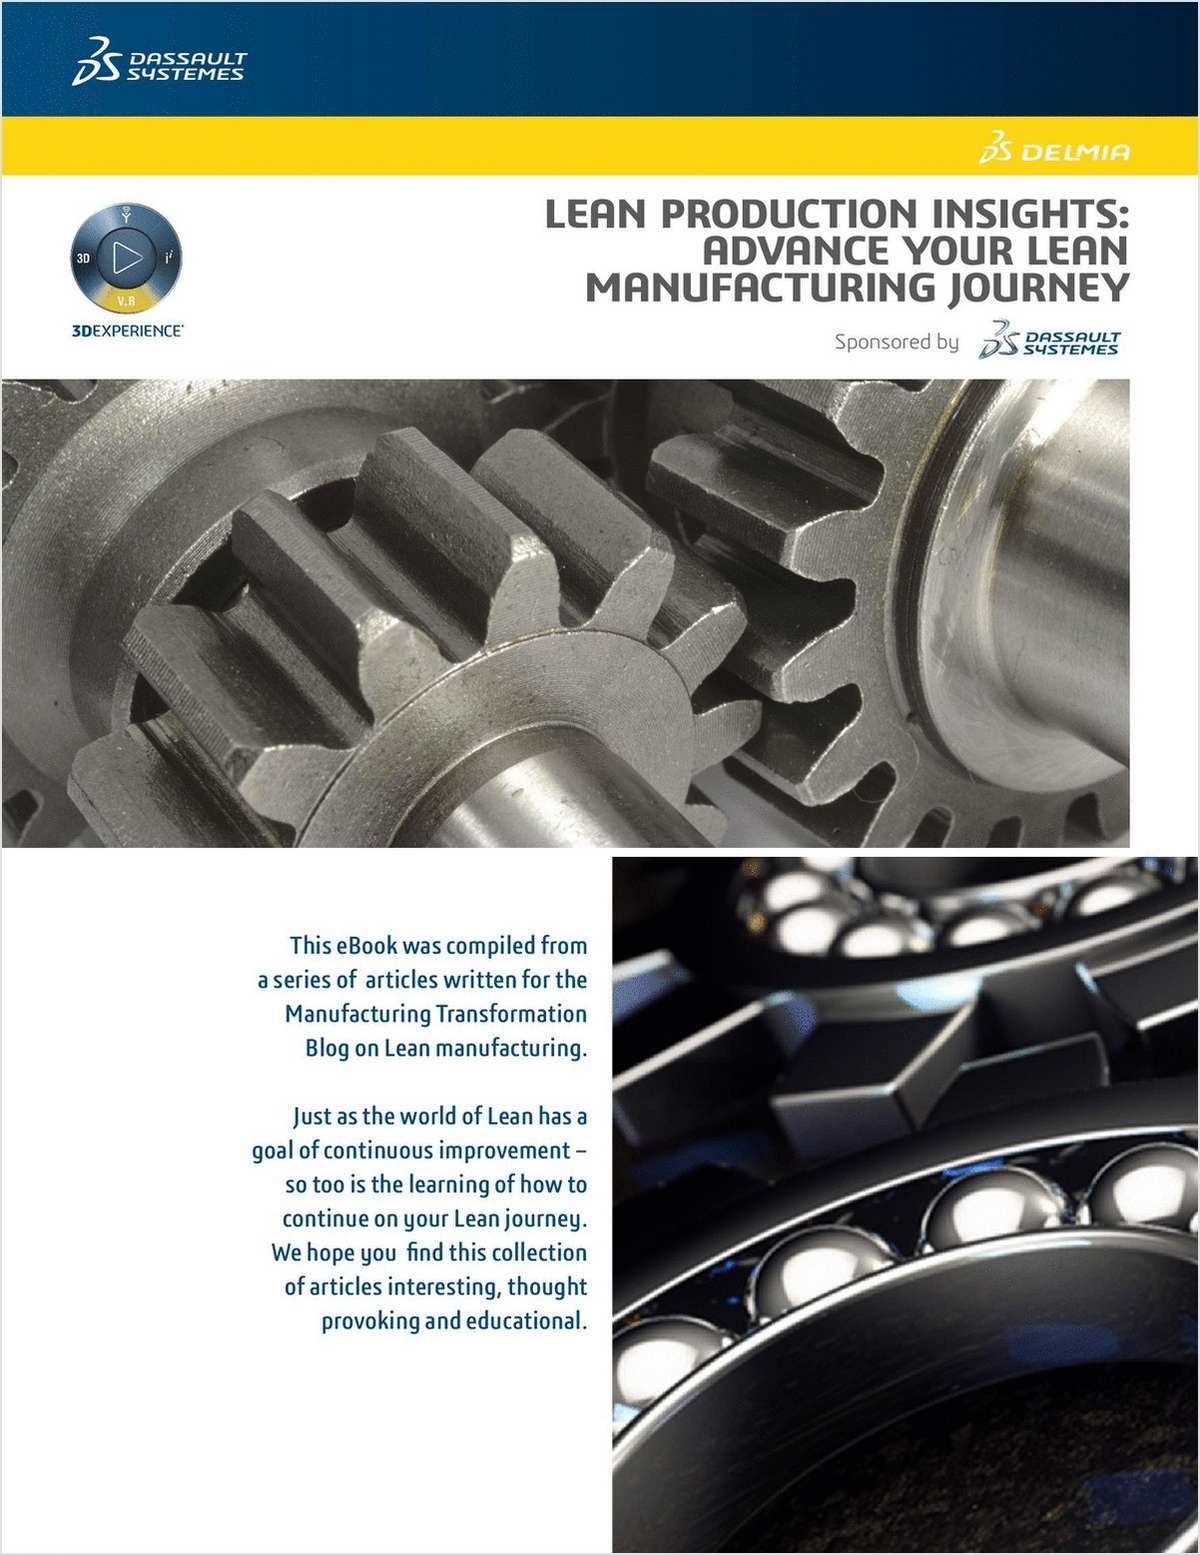 Lean Production Insights - Advance Your Manufacturing Journey